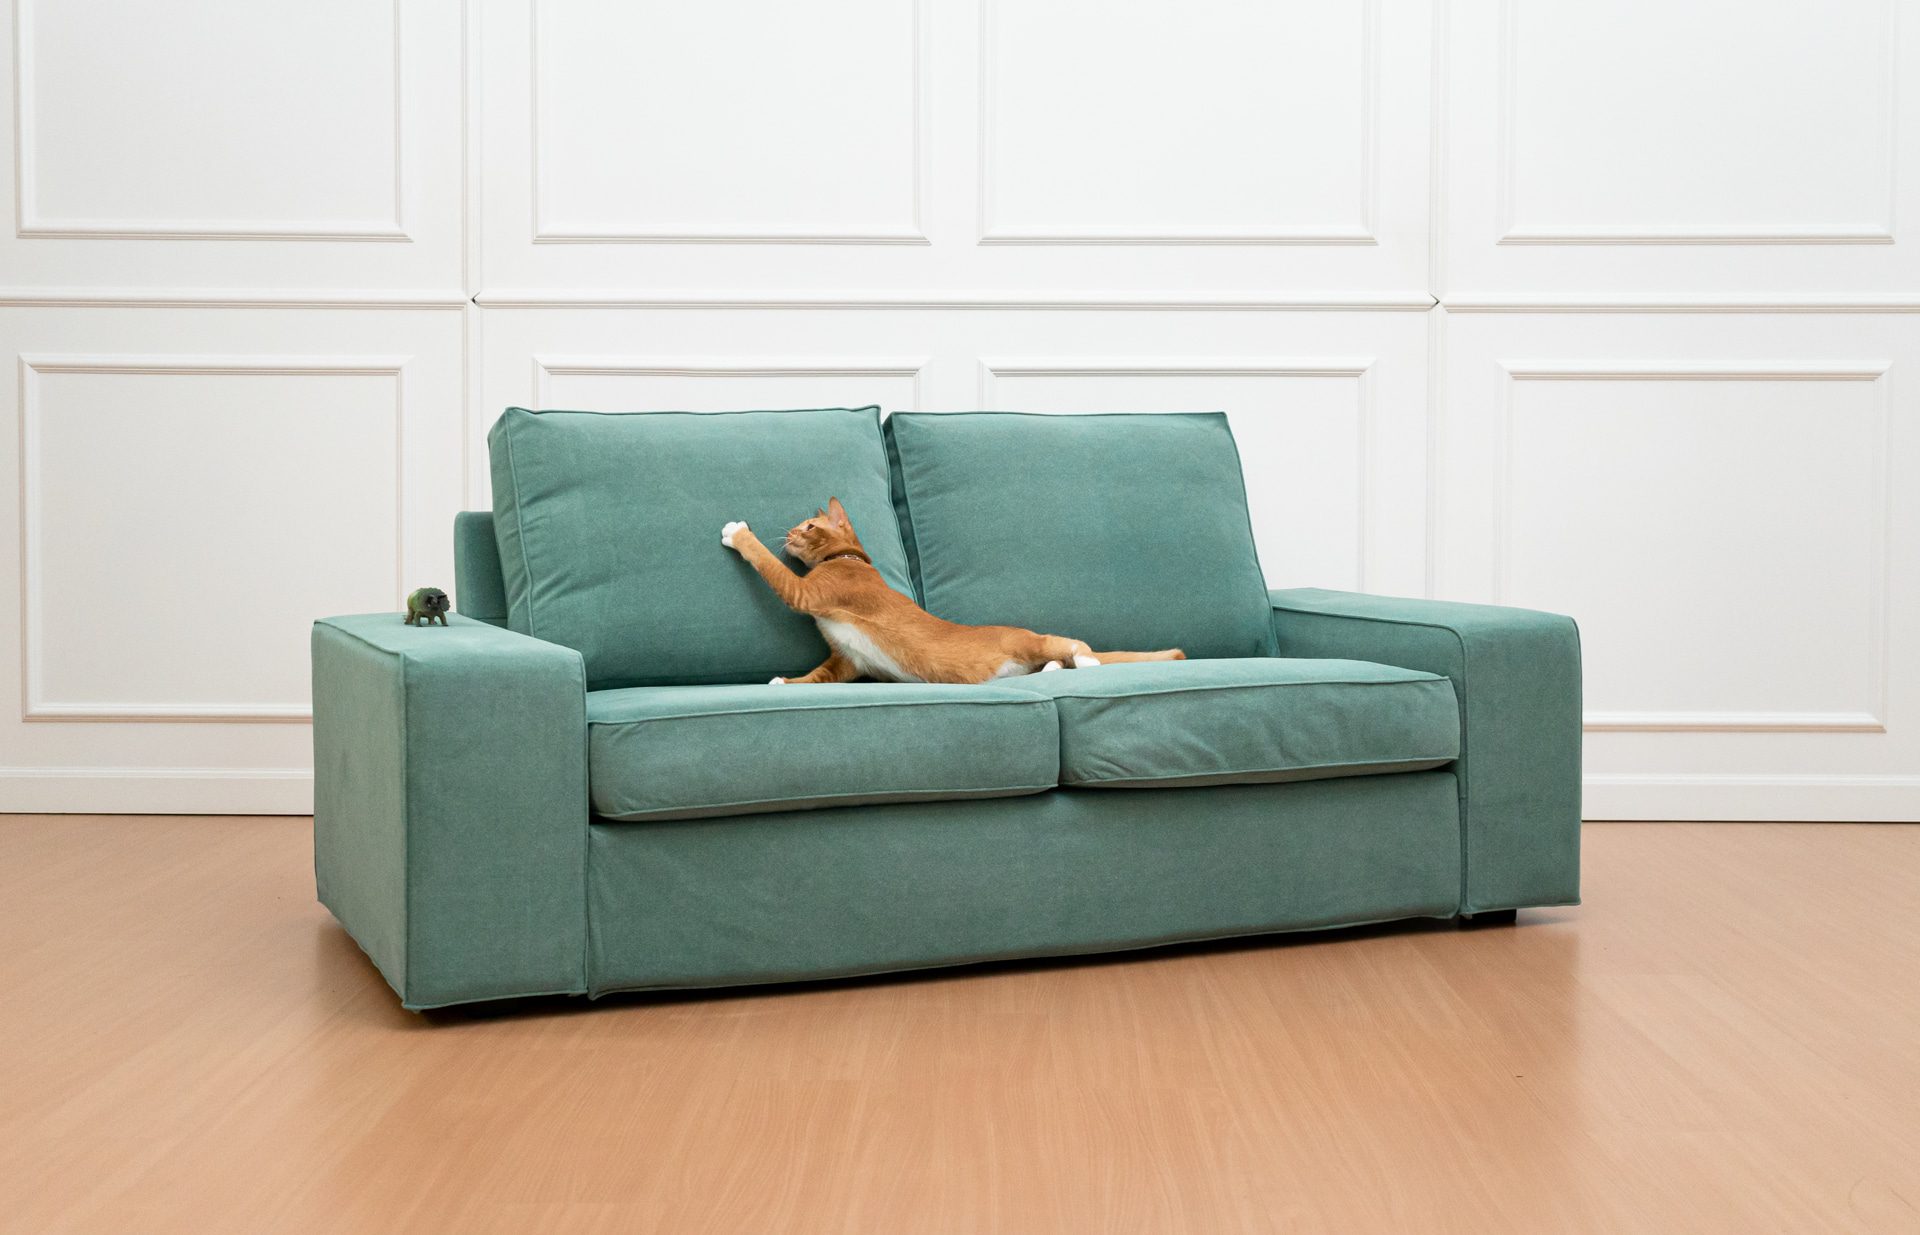 Soldaat Malawi Reageren Where to get the ultimate cat proof couch - without buying a new one |  Comfort Works Blog & Sofa Resources